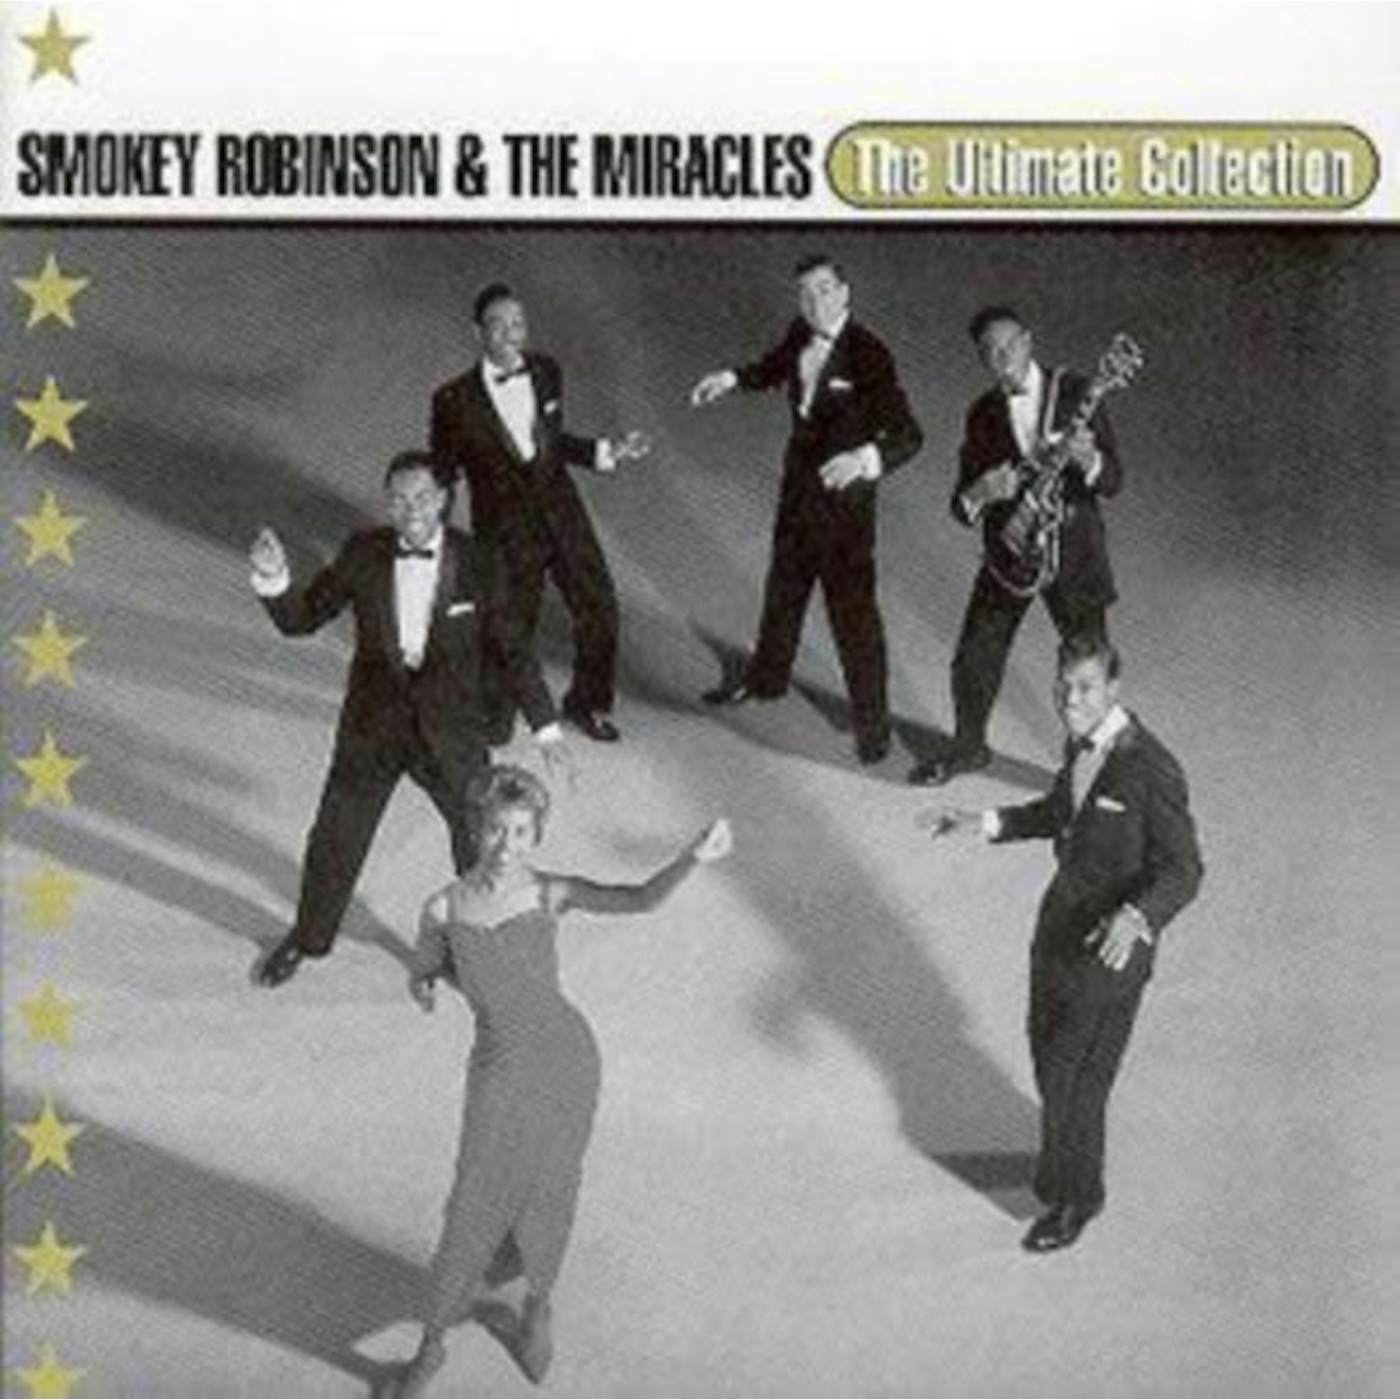 Smokey Robinson & The Miracles CD - The Ultimate Collection